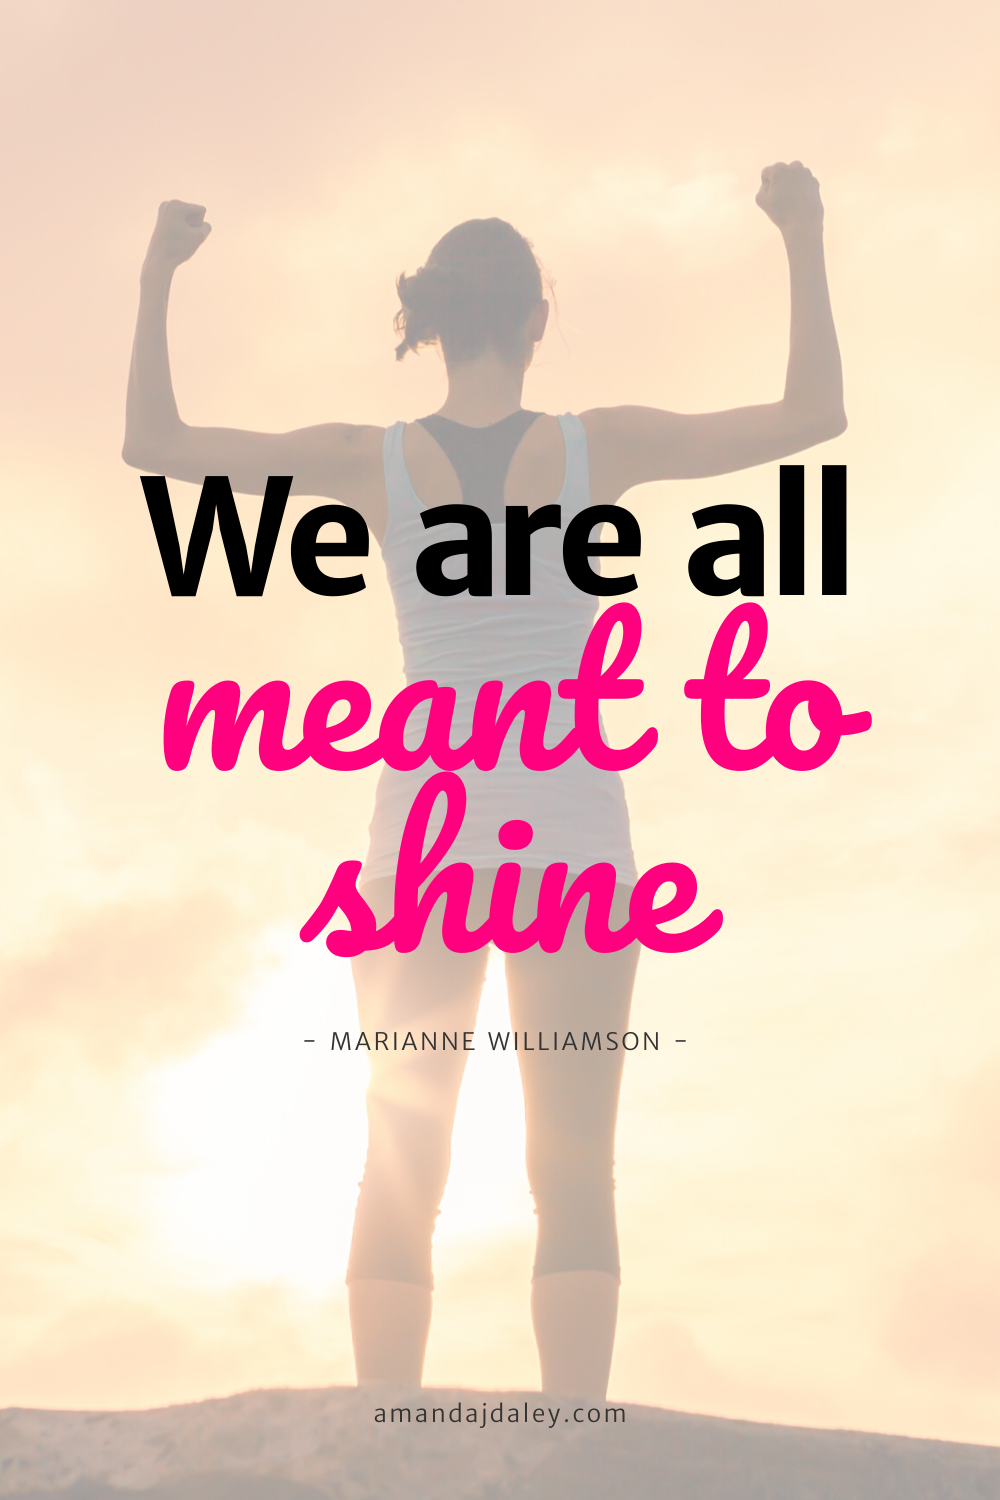 Motivational quote for female entrepreneurs - we are all meant to shine - Marianne Williamson.png